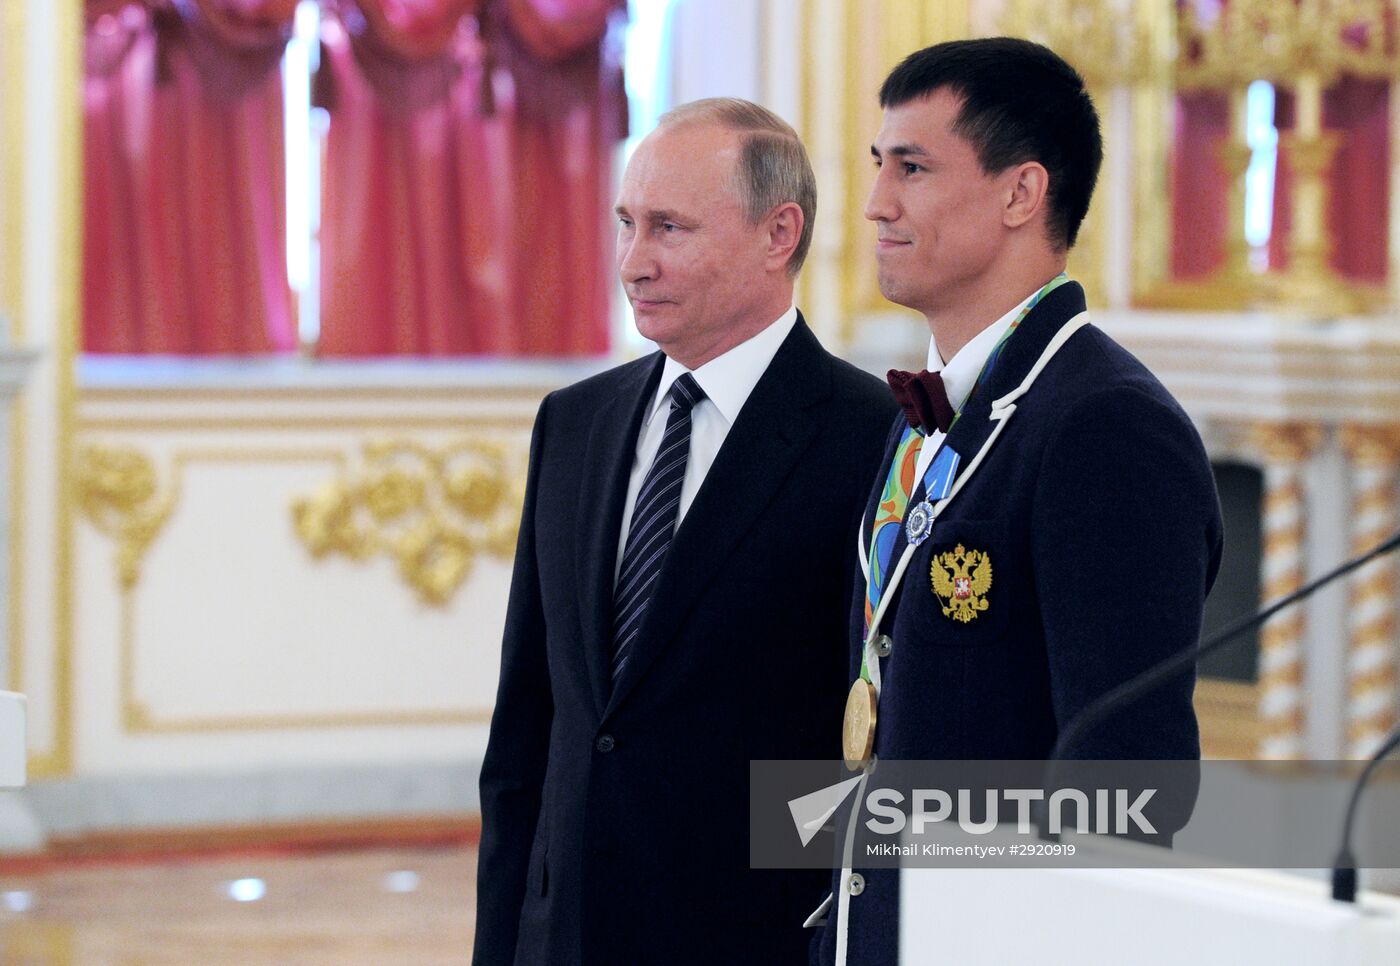 President Vladimir Putin gives government awards to Olympic medalists